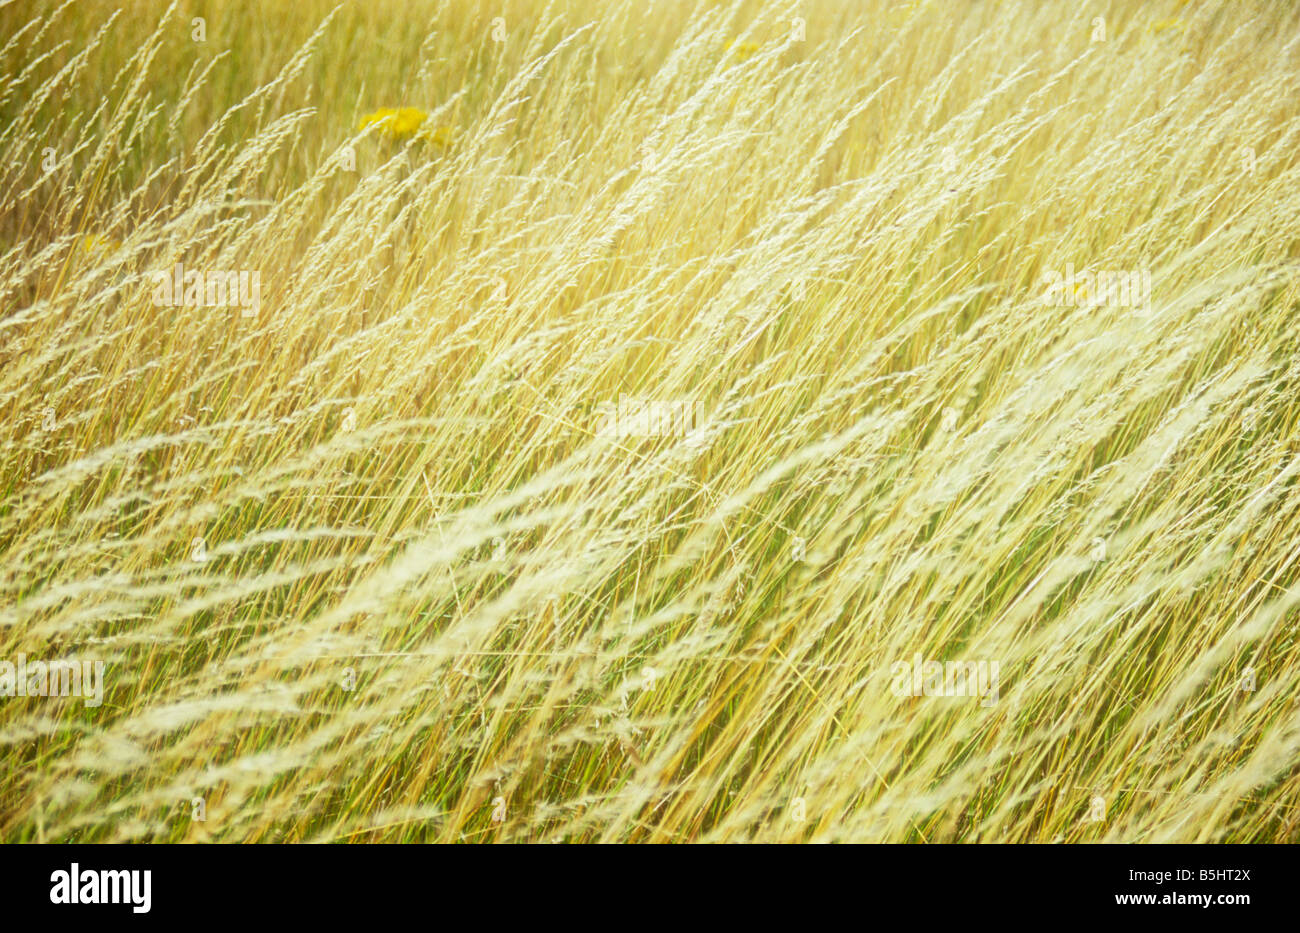 Part of meadow of dry golden Red fescue or Festuca rubra grass blowing in summer breeze Stock Photo